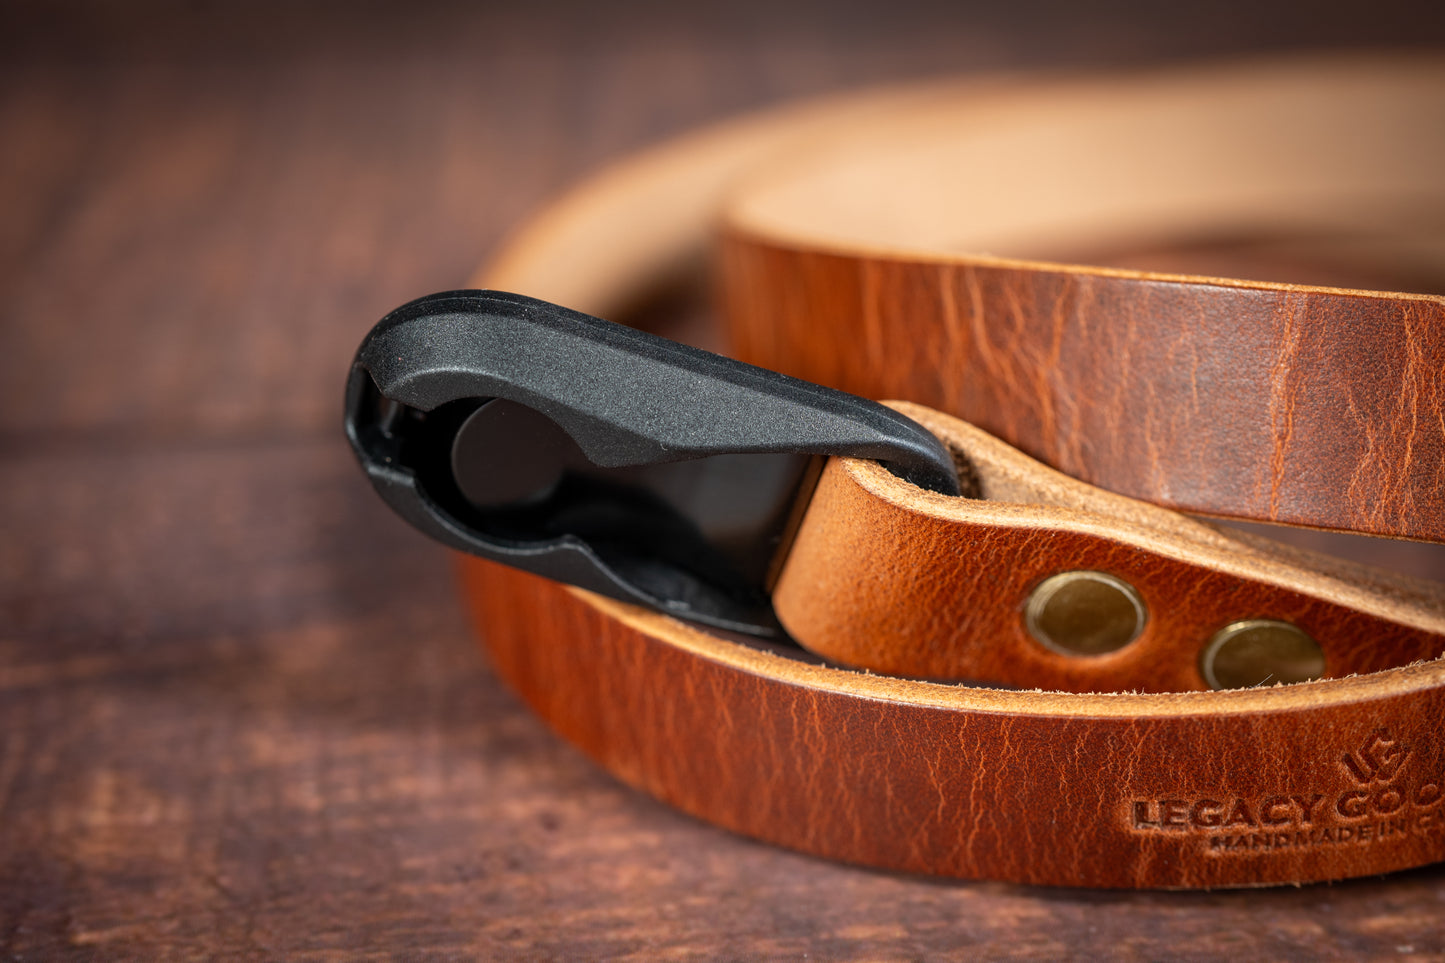 Vegetable Tanned Leather Camera Strap Developing Unique Patina Over Time